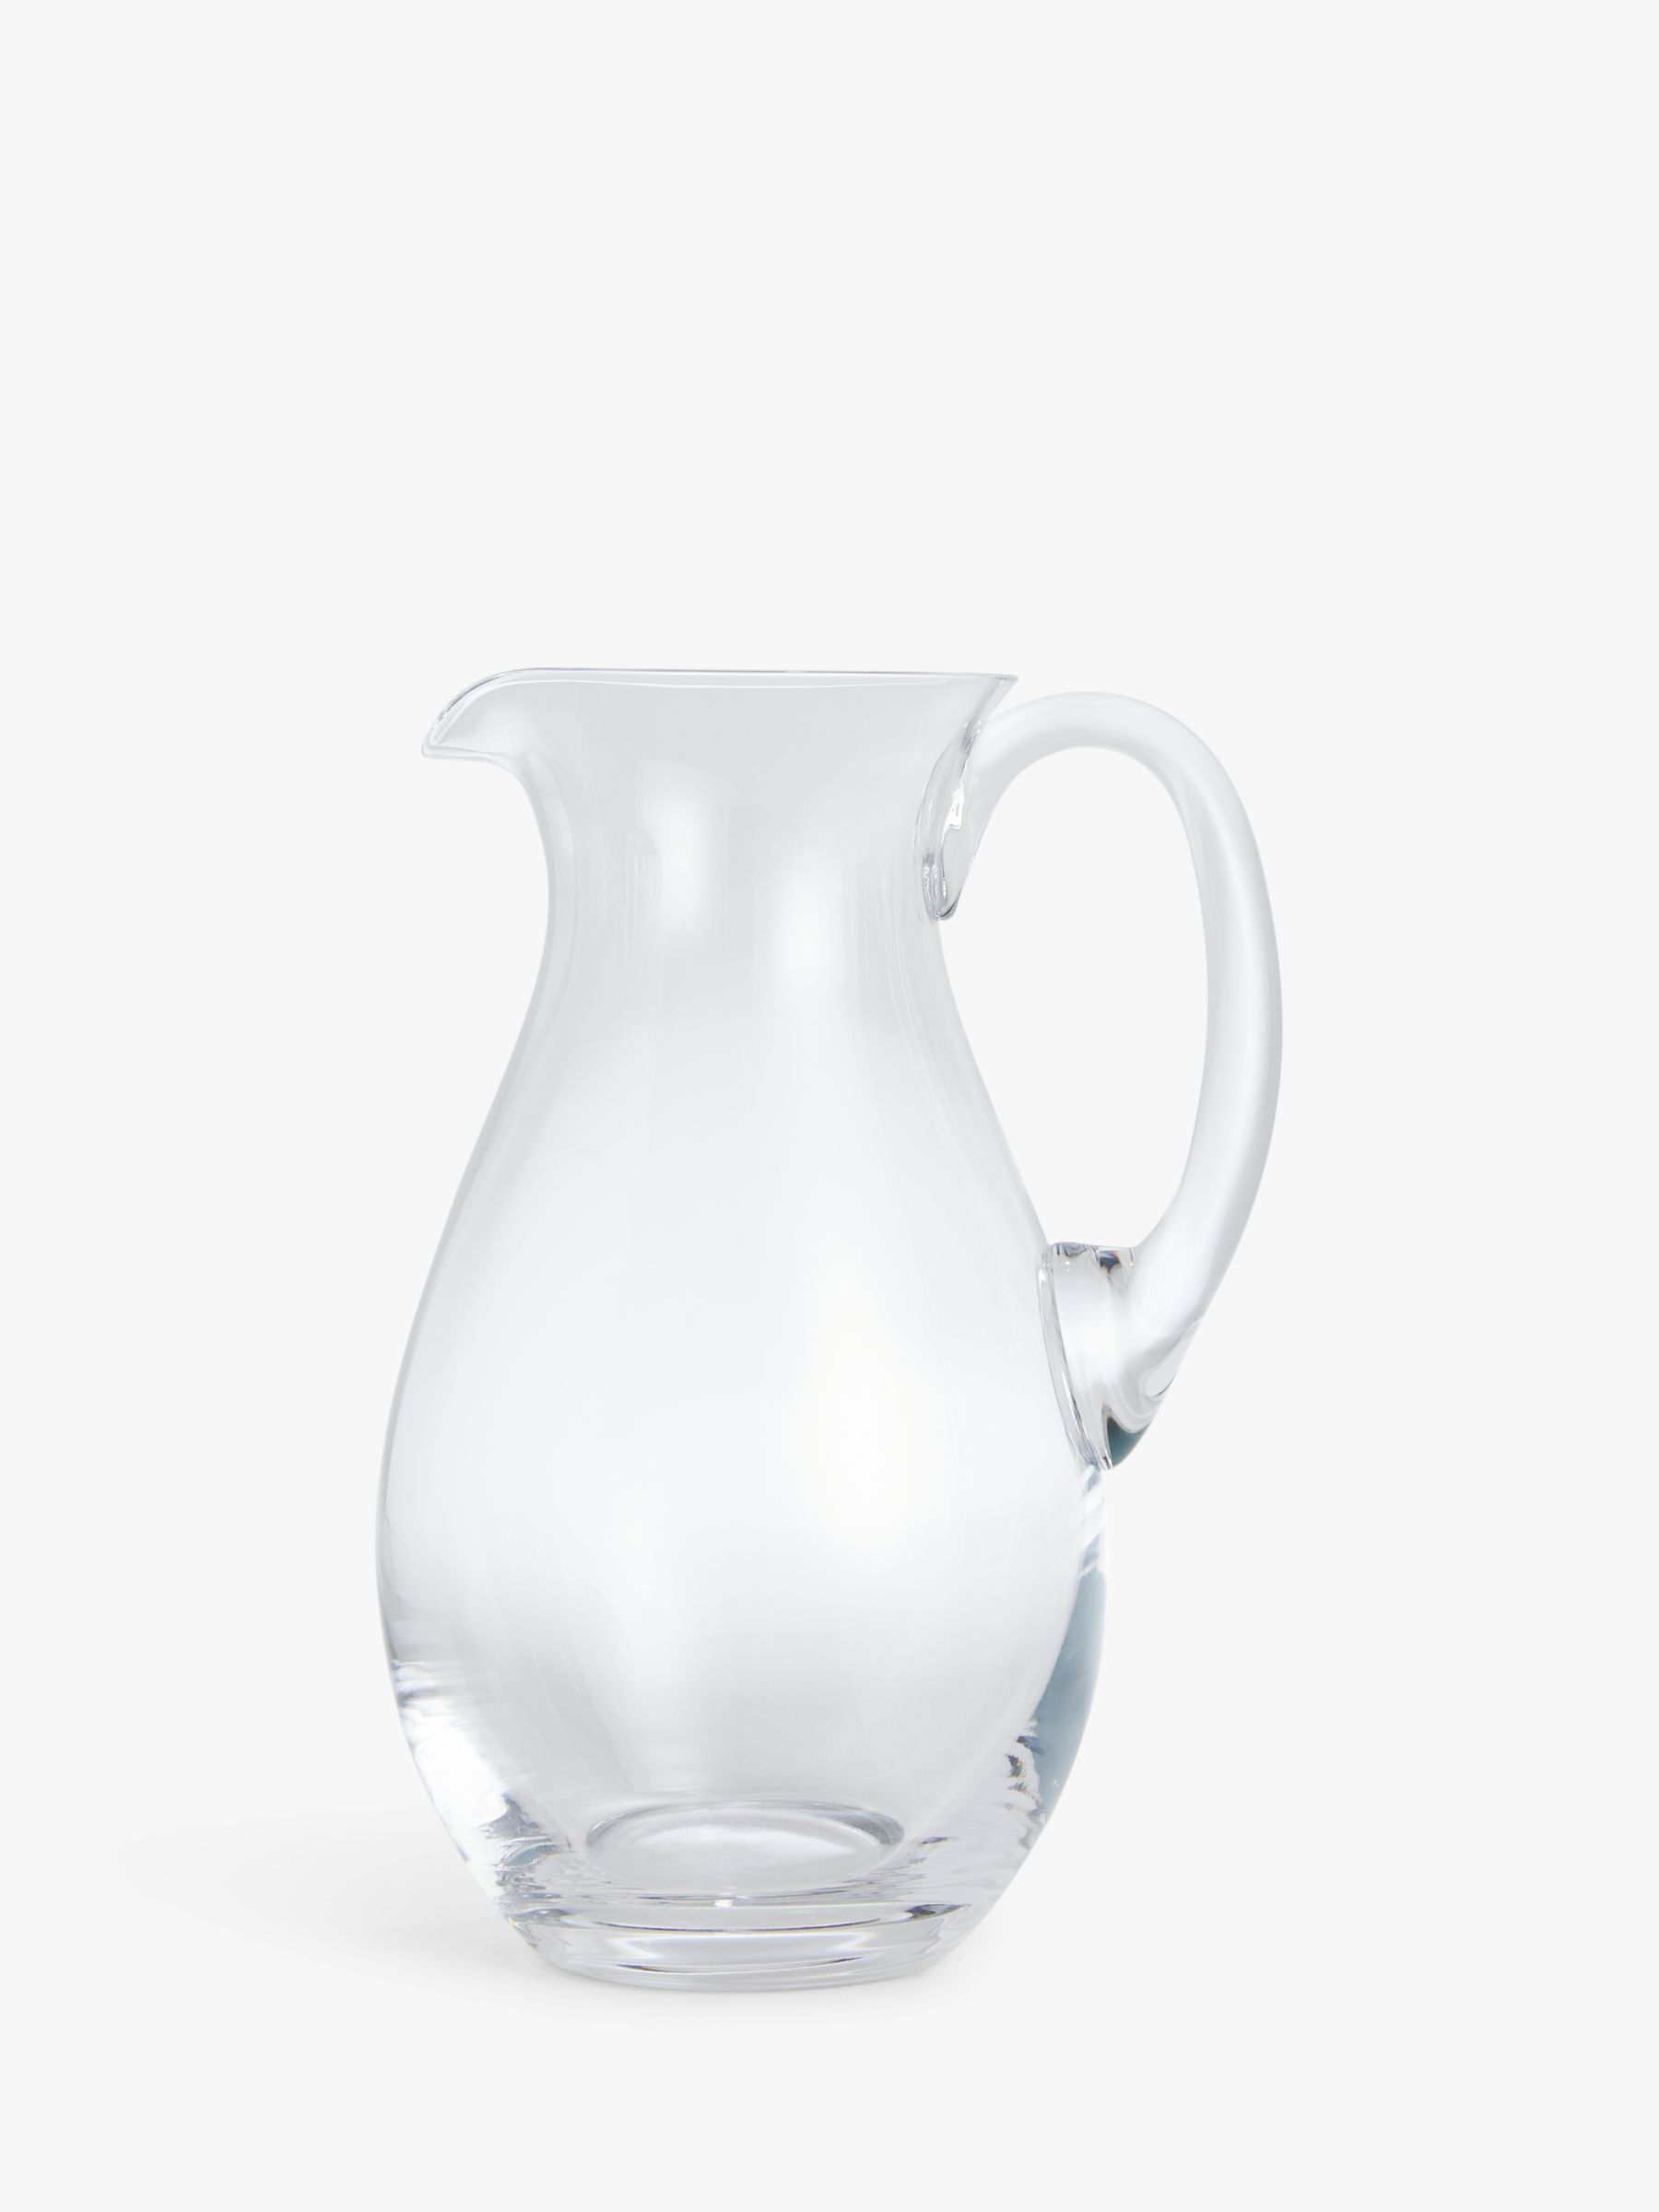 ANYDAY John Lewis & Partners Dine Glass Jug, 1.9L, Clear